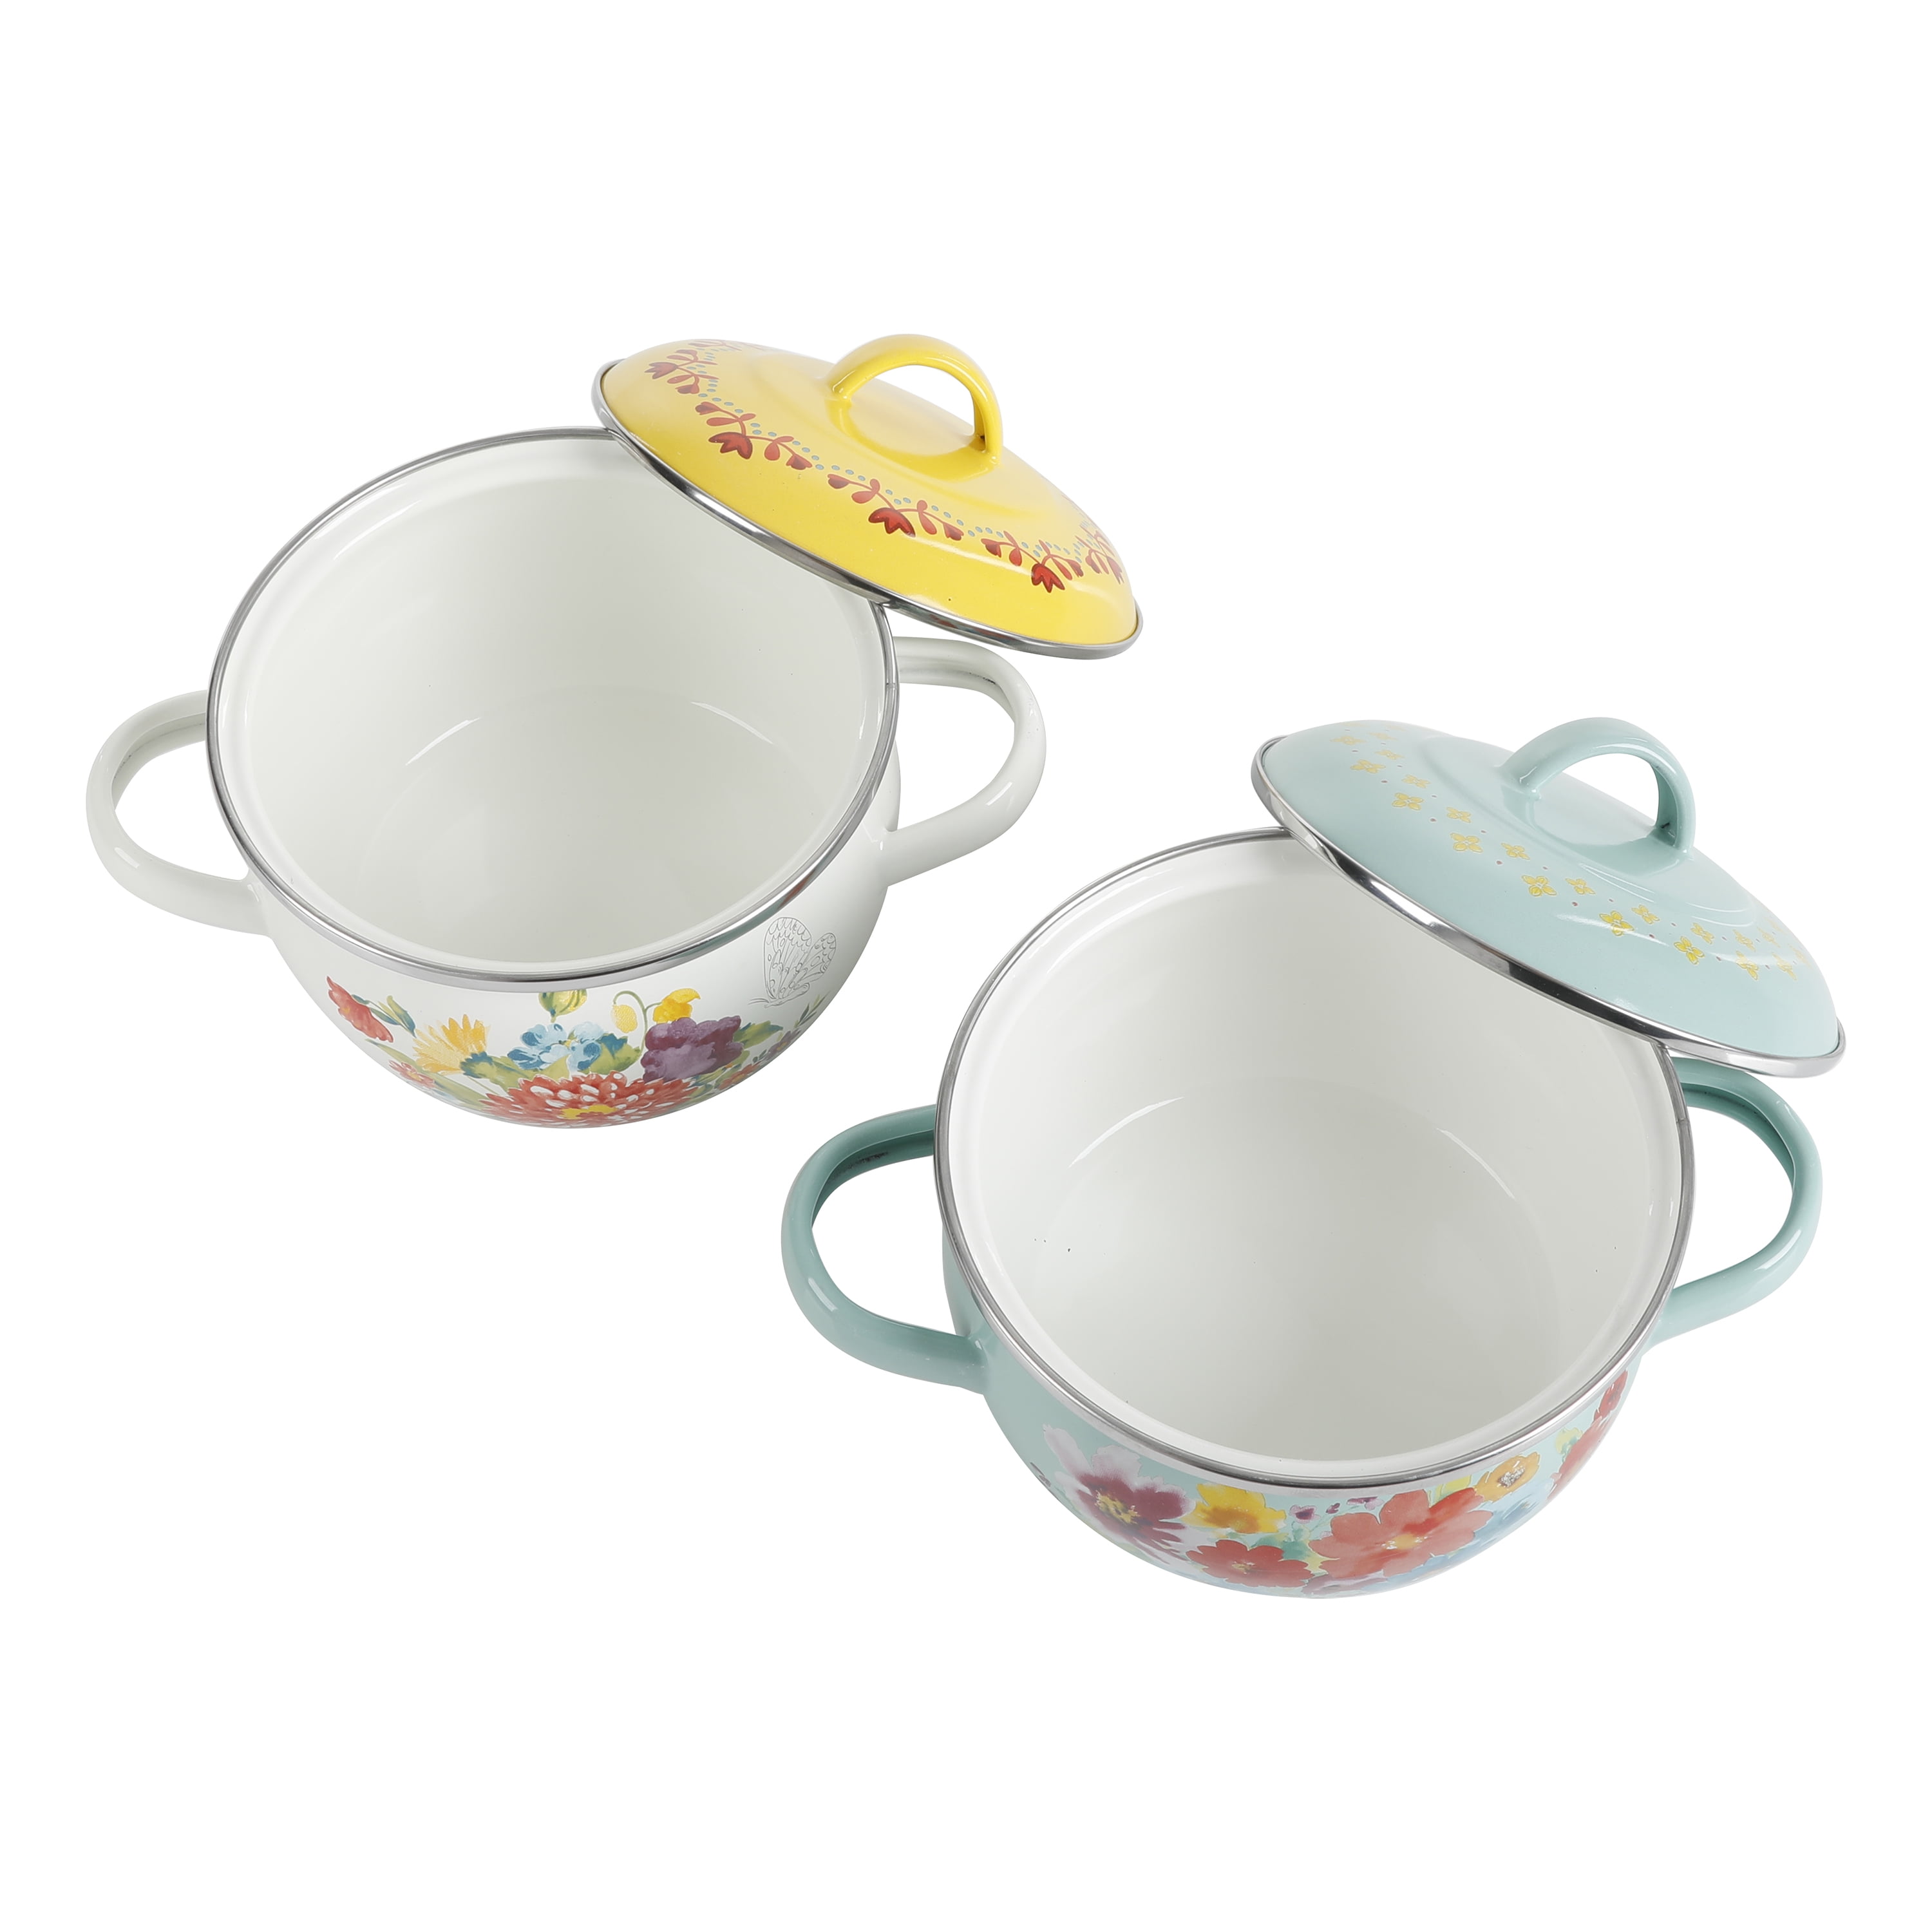 This Adorable Le Creuset Dupe By Pioneer Woman is Only $25 – SheKnows